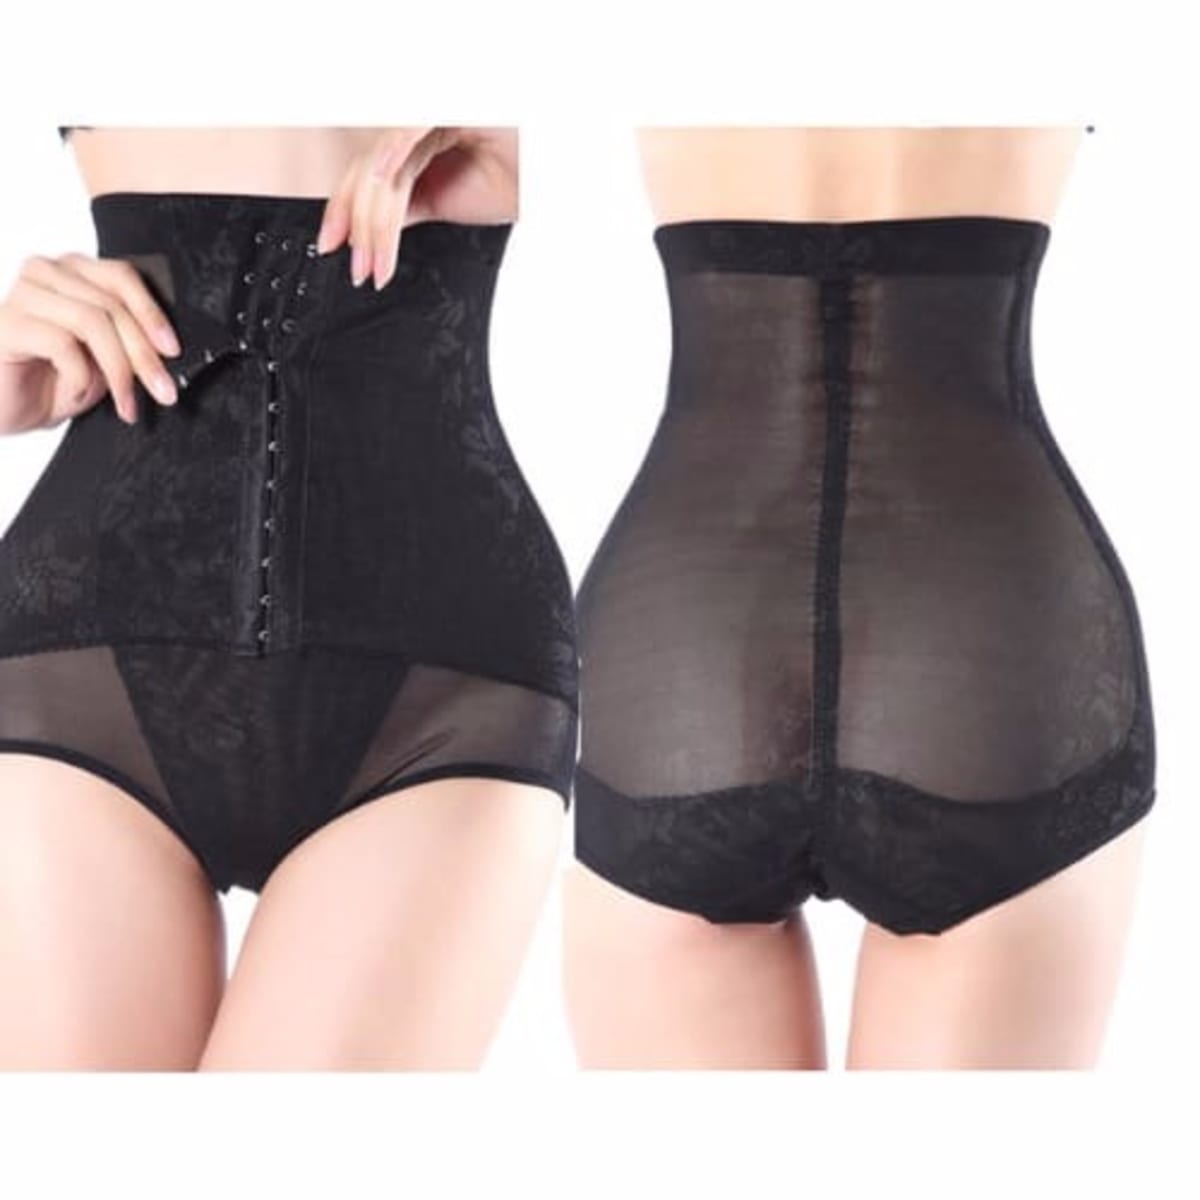 Bodyshapers and Body Shaping Underwear